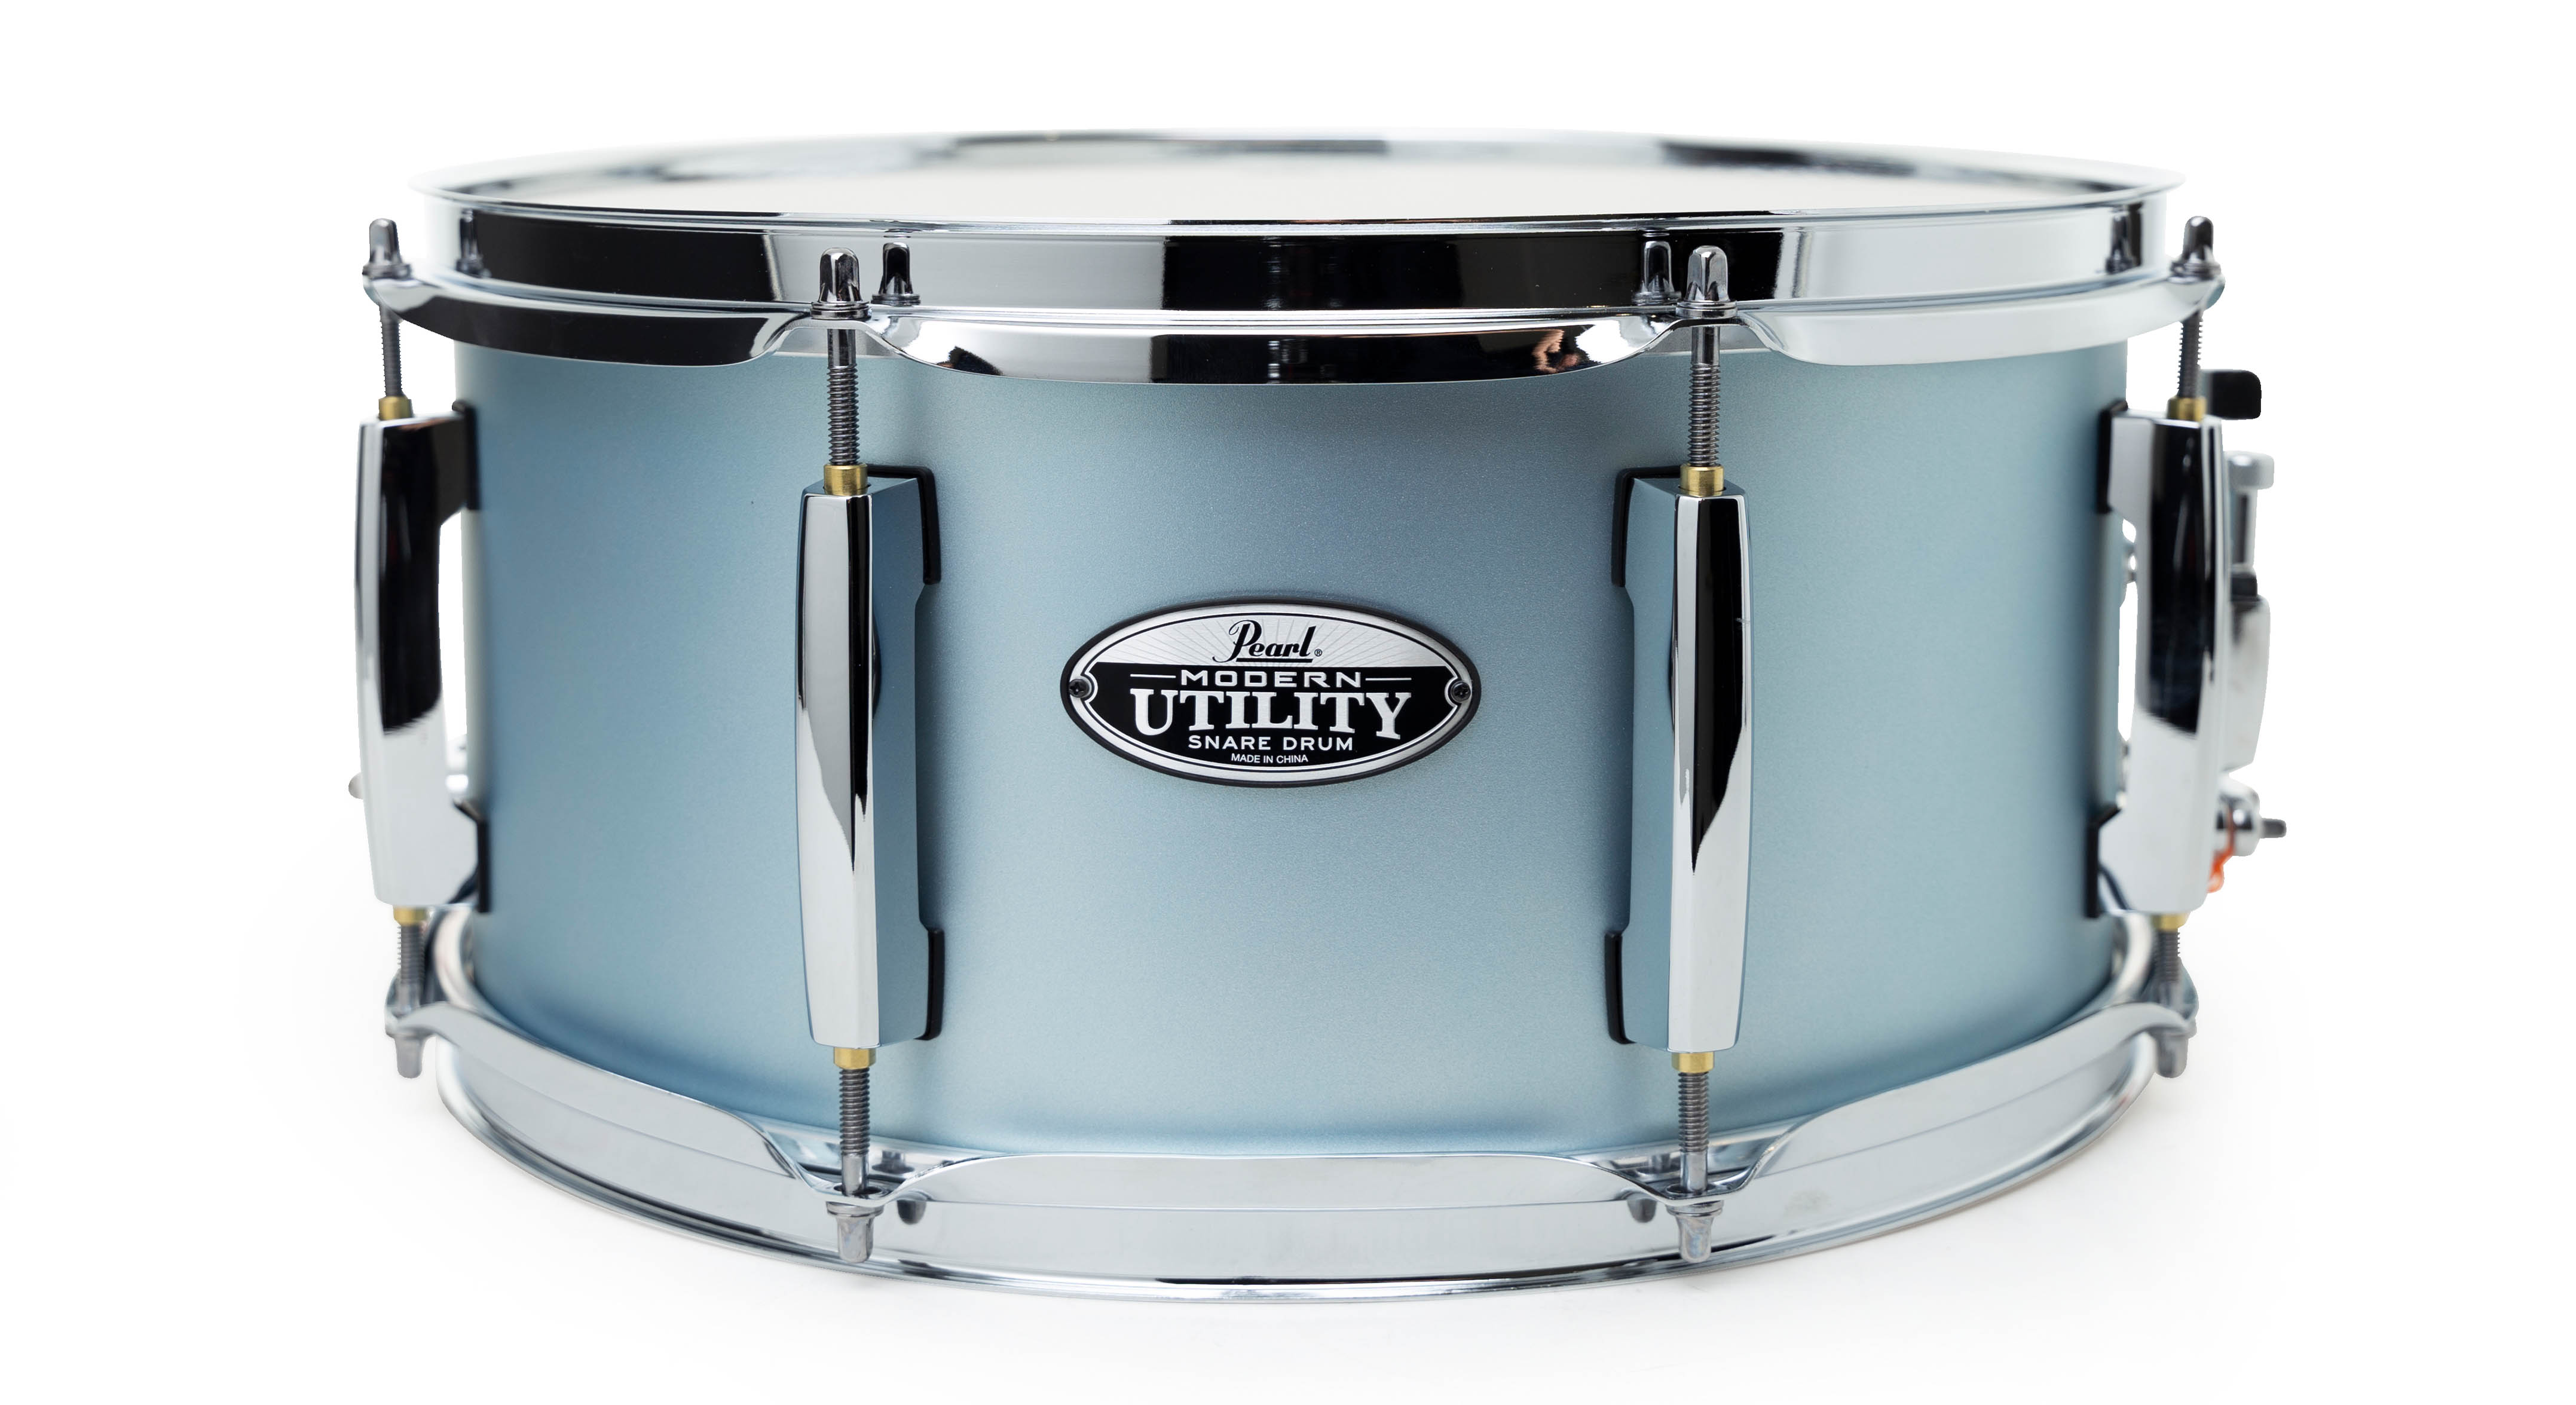 Maple Utility 14X6.5 | Pearl Drums -Official site-